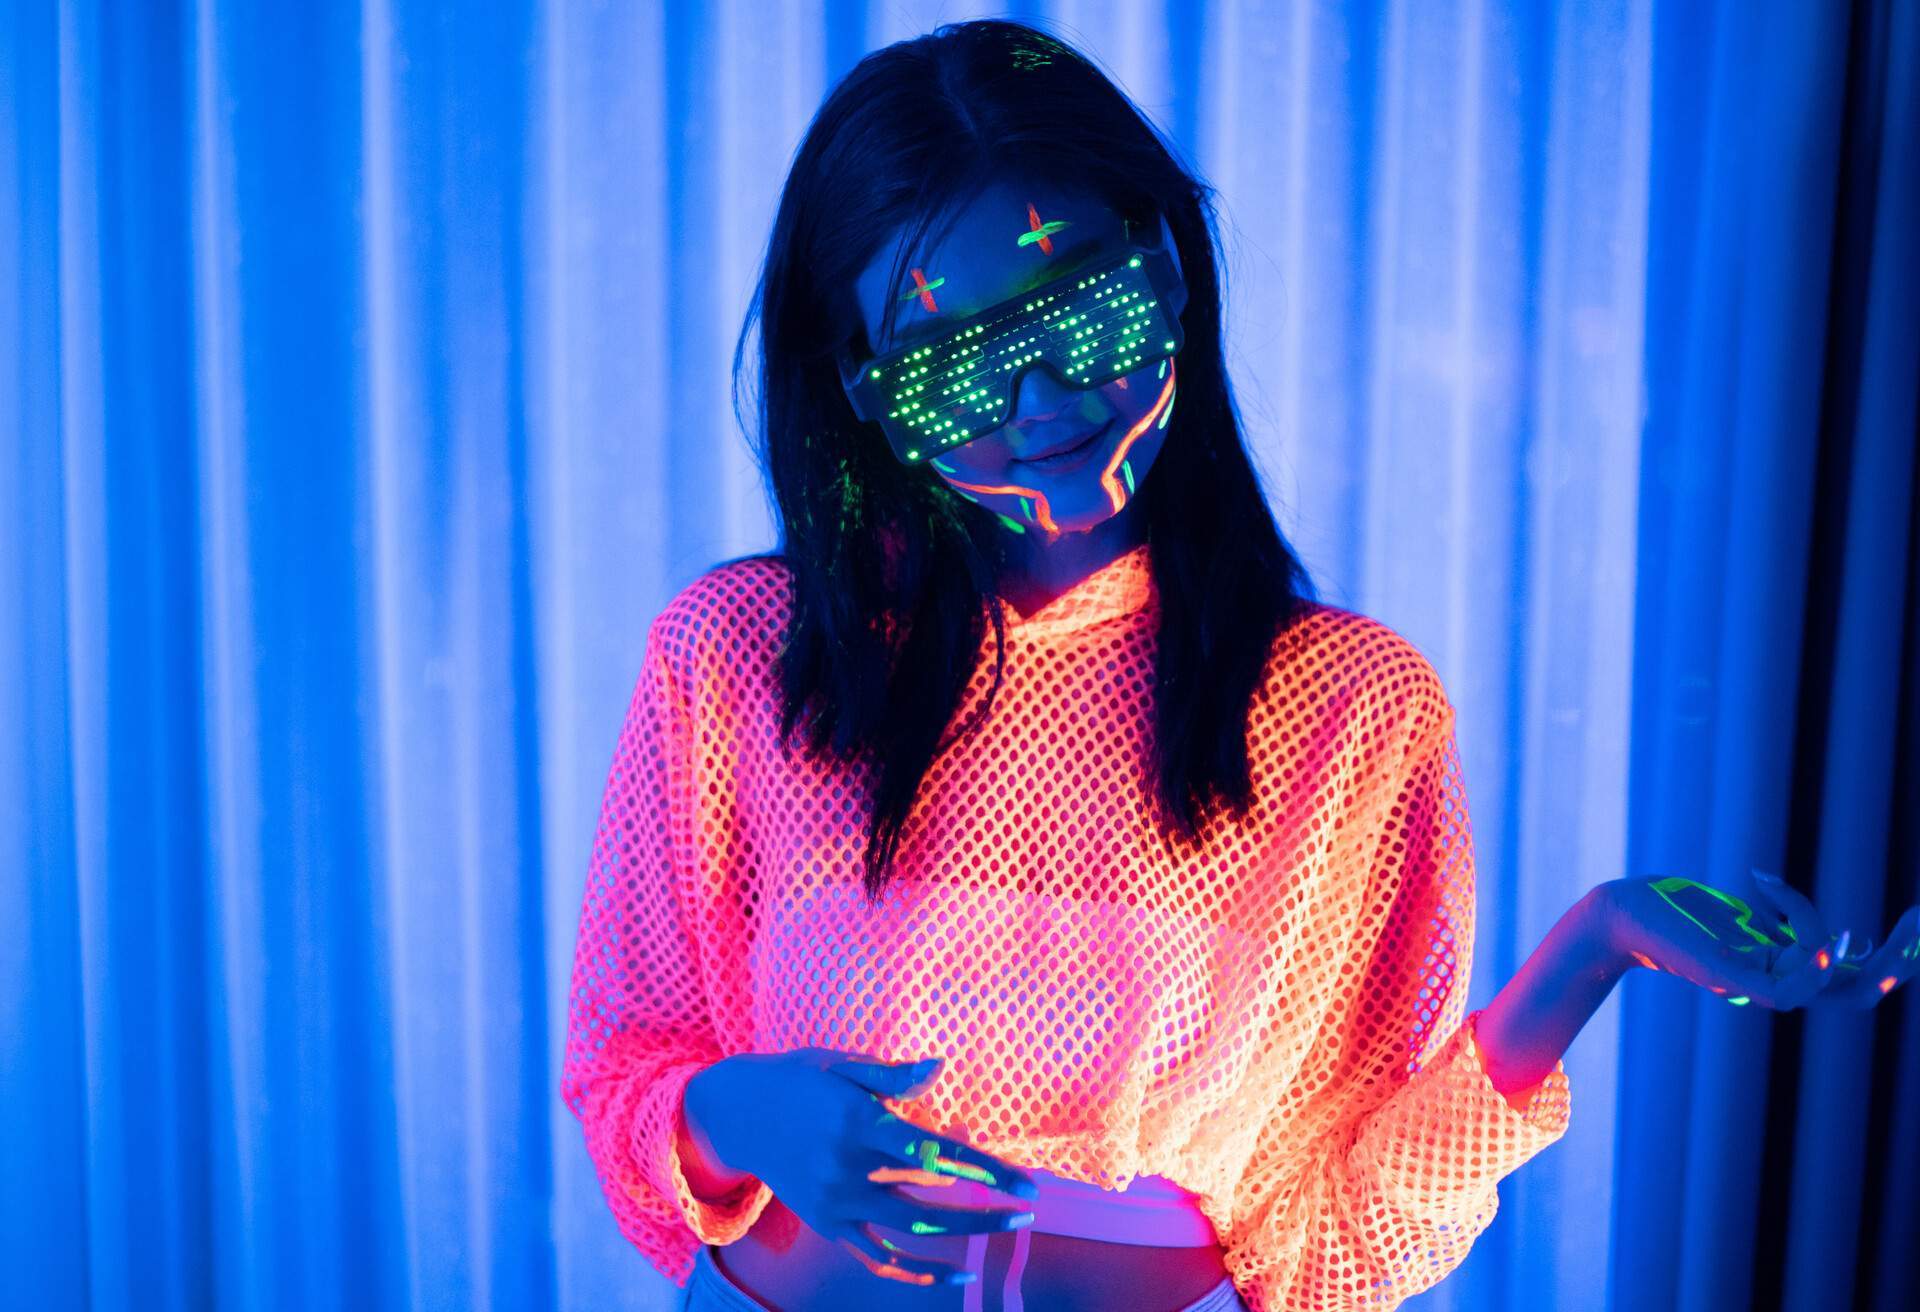 Ultraviolet lights illuminate a woman wearing neon orange clothing, LED sunglasses, and face paint.